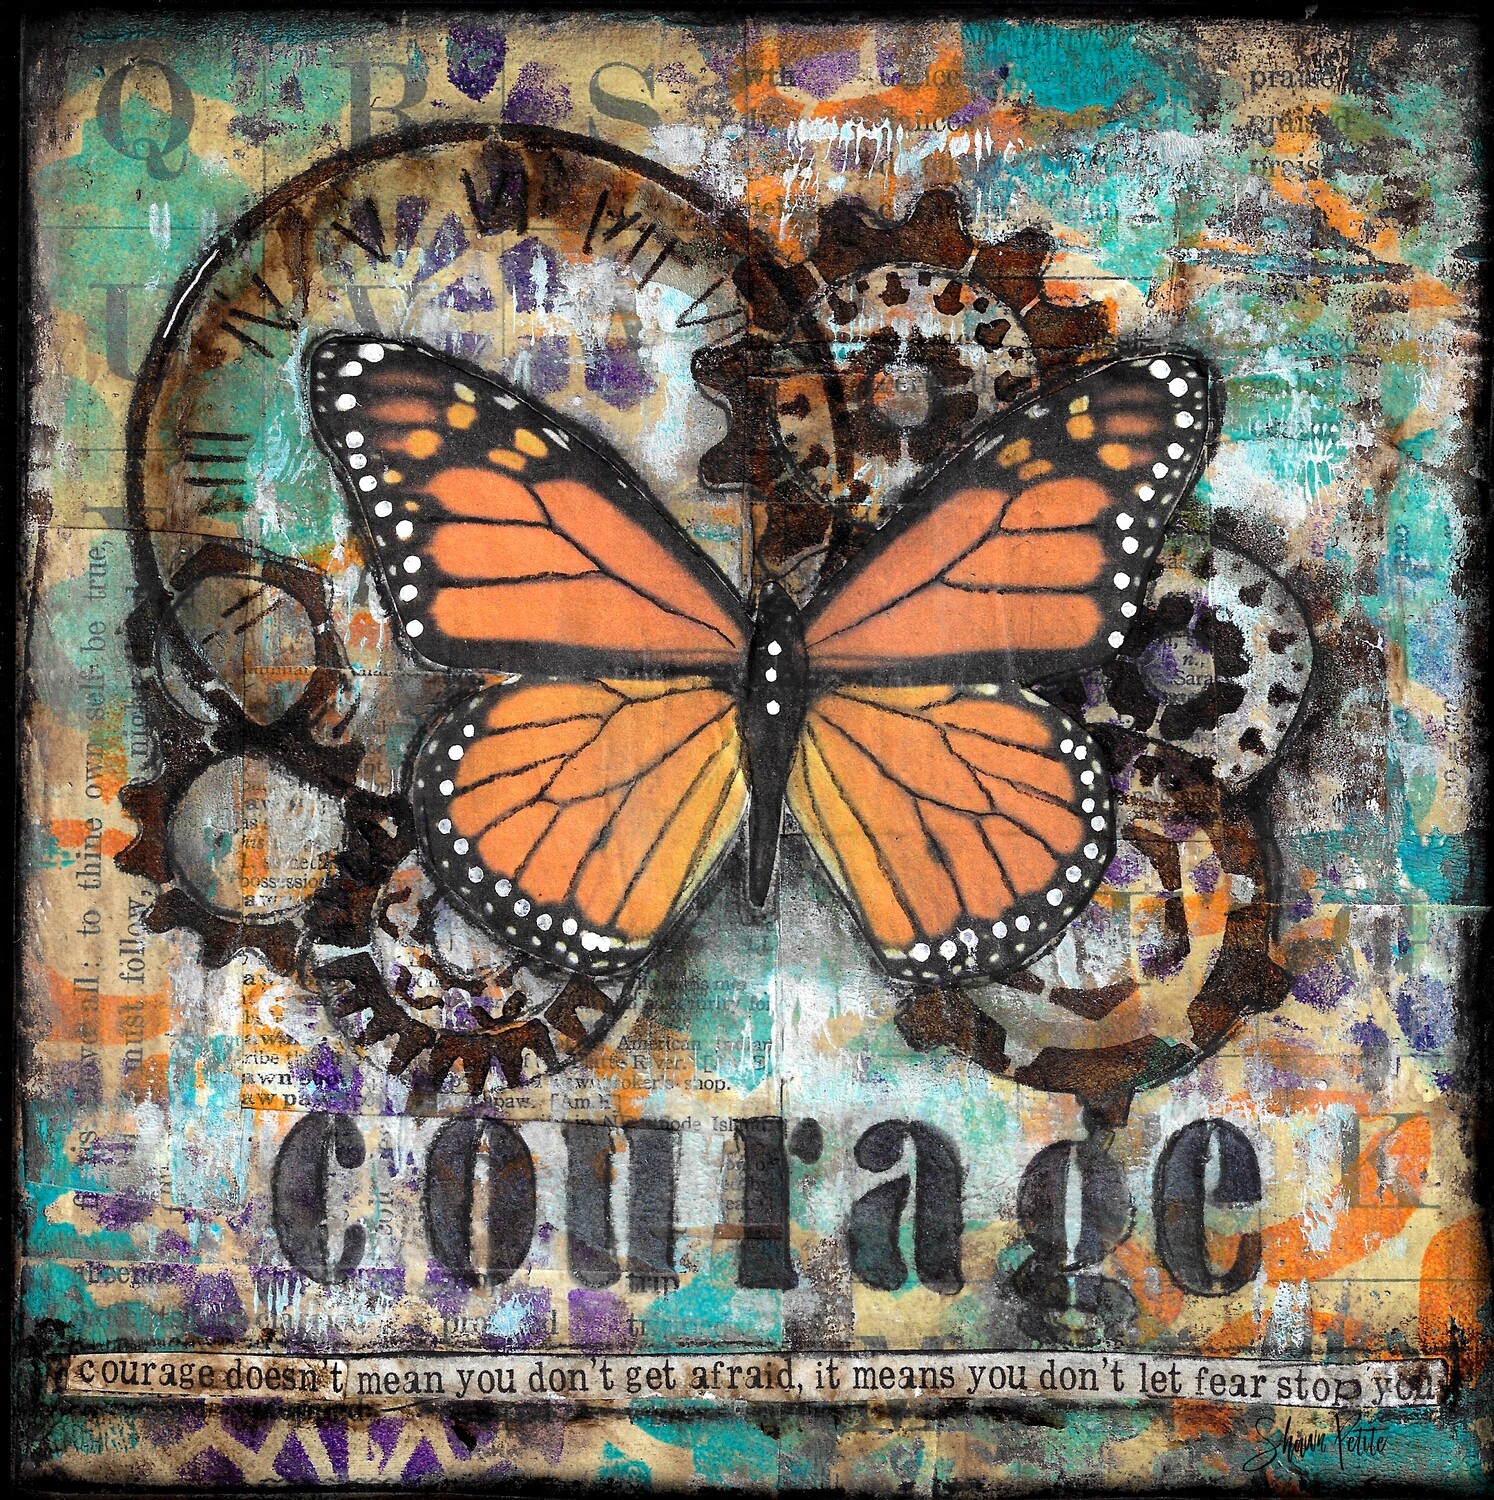 Courage doesn't mean you don't get afraid, digital instant download